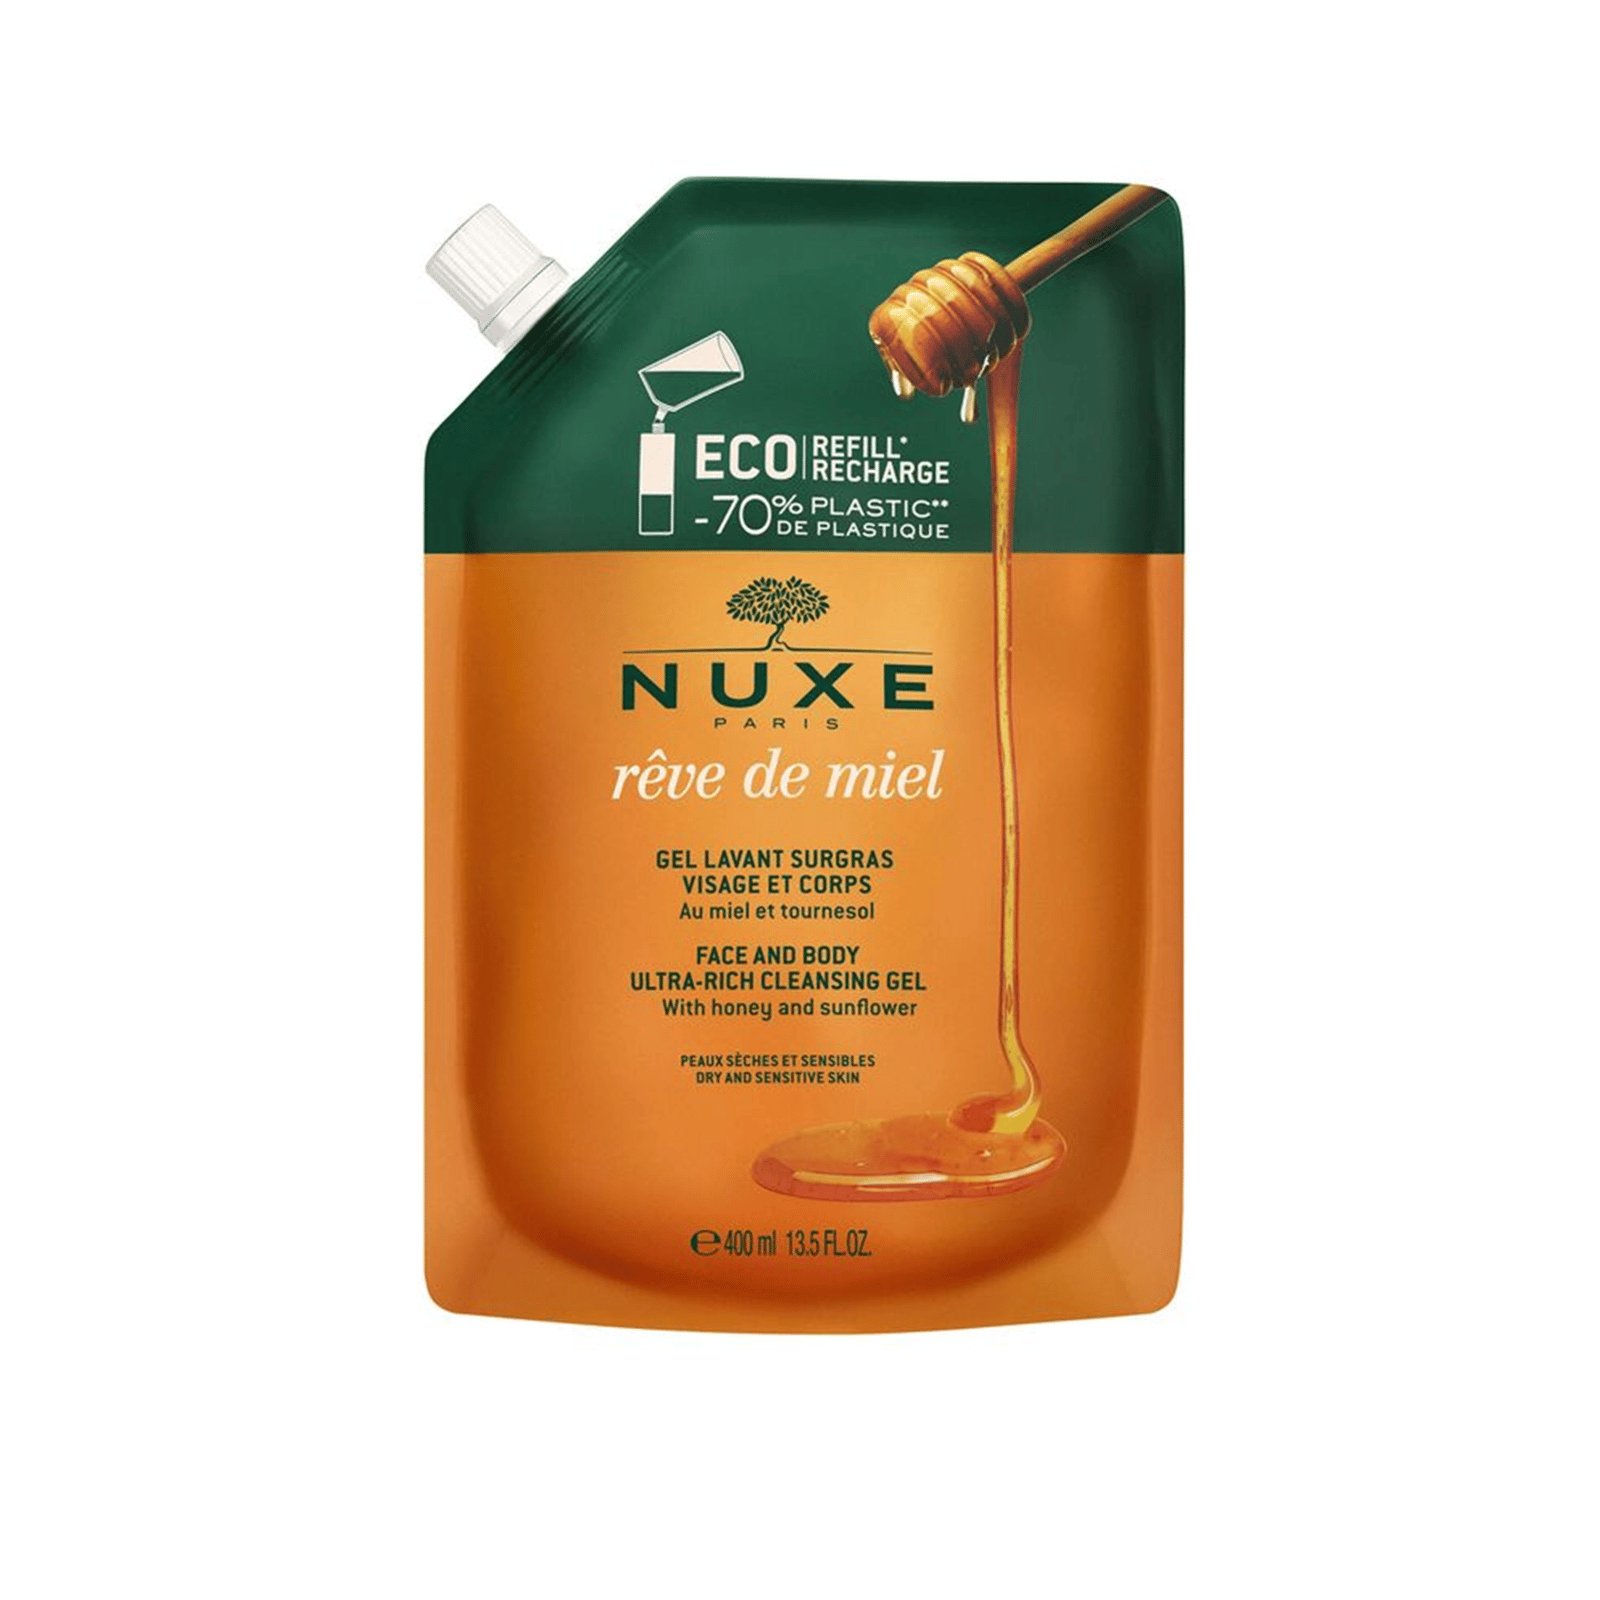 NUXE Rêve de Miel Face and Body Ultra-Rich Cleansing Gel Eco-Refill 400ml